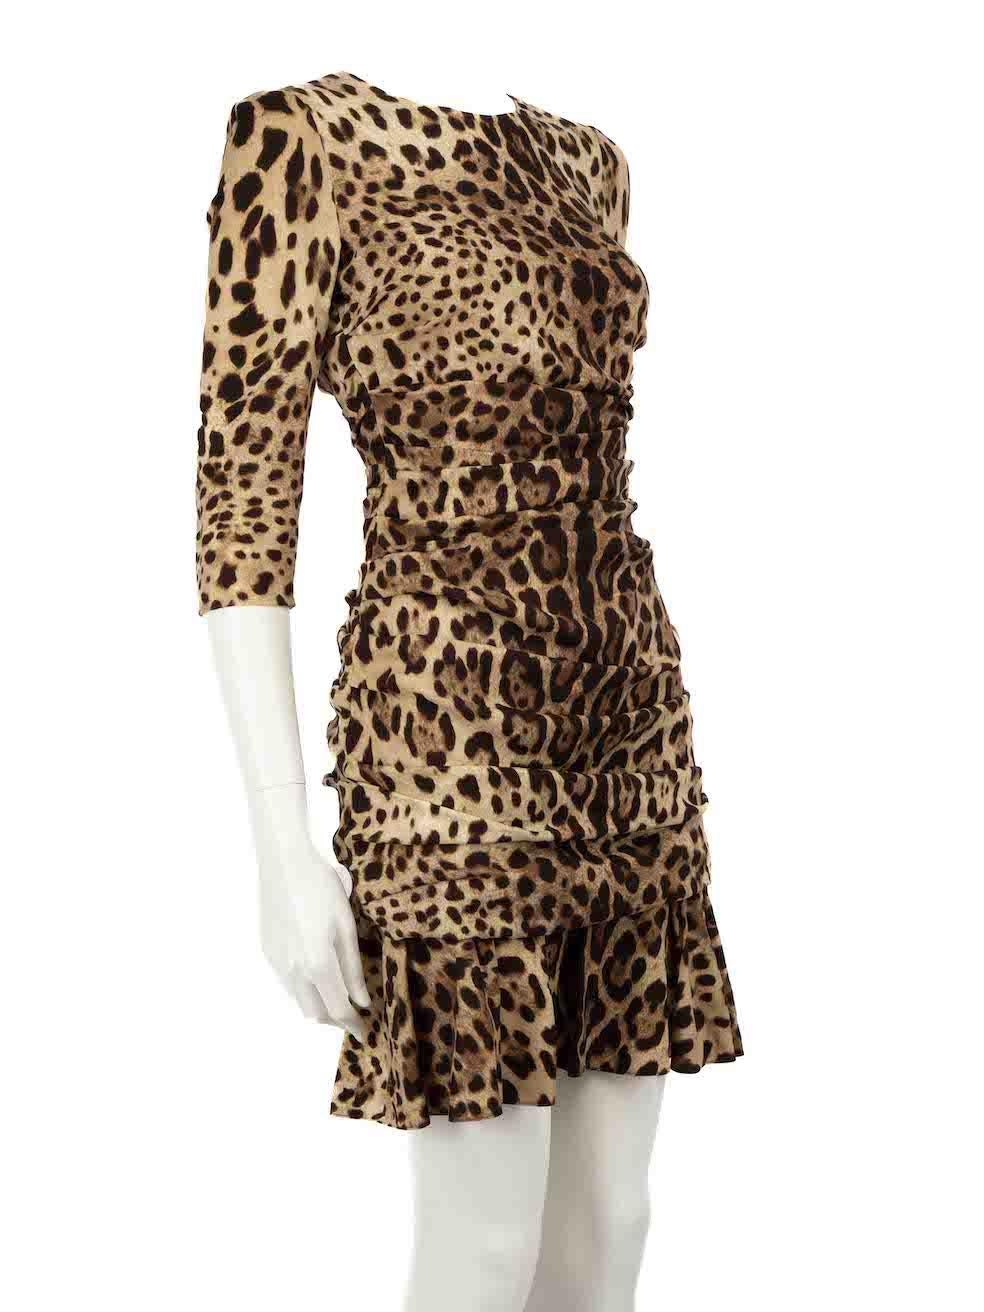 CONDITION is Good. Minor wear to dress is evident. Light wear to the fabric composition with a number of pulls to the weave found over the shoulders on this used Dolce & Gabbana designer resale item.
 
 
 
 Details
 
 
 Brown
 
 Silk
 
 Dress
 
